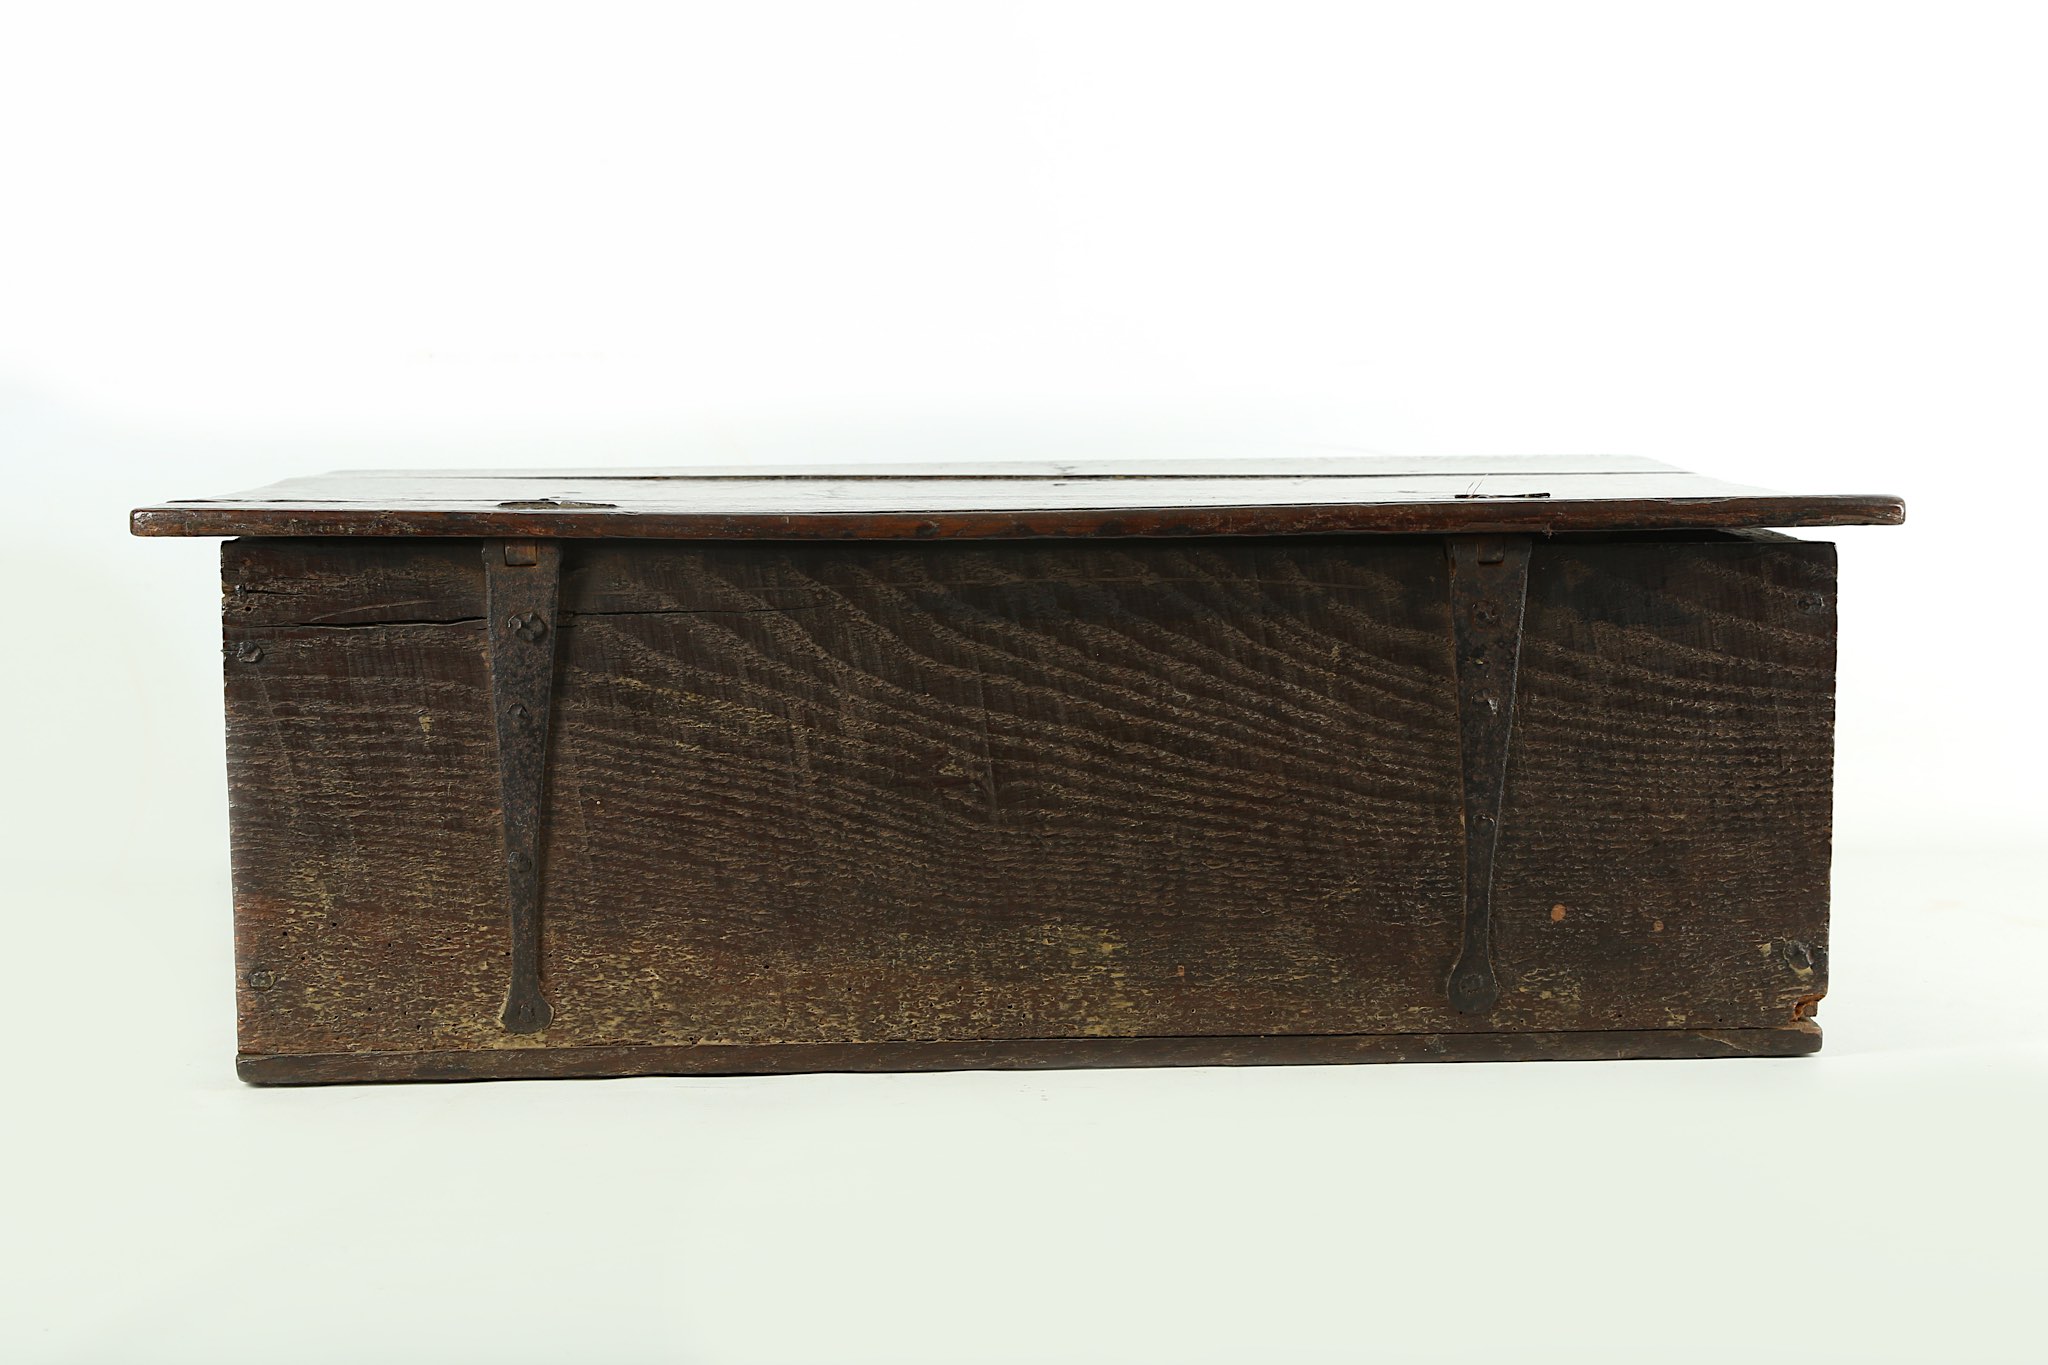 A 17th Century oak bible box, the front panel carved with a coiled dragon. - Image 4 of 5